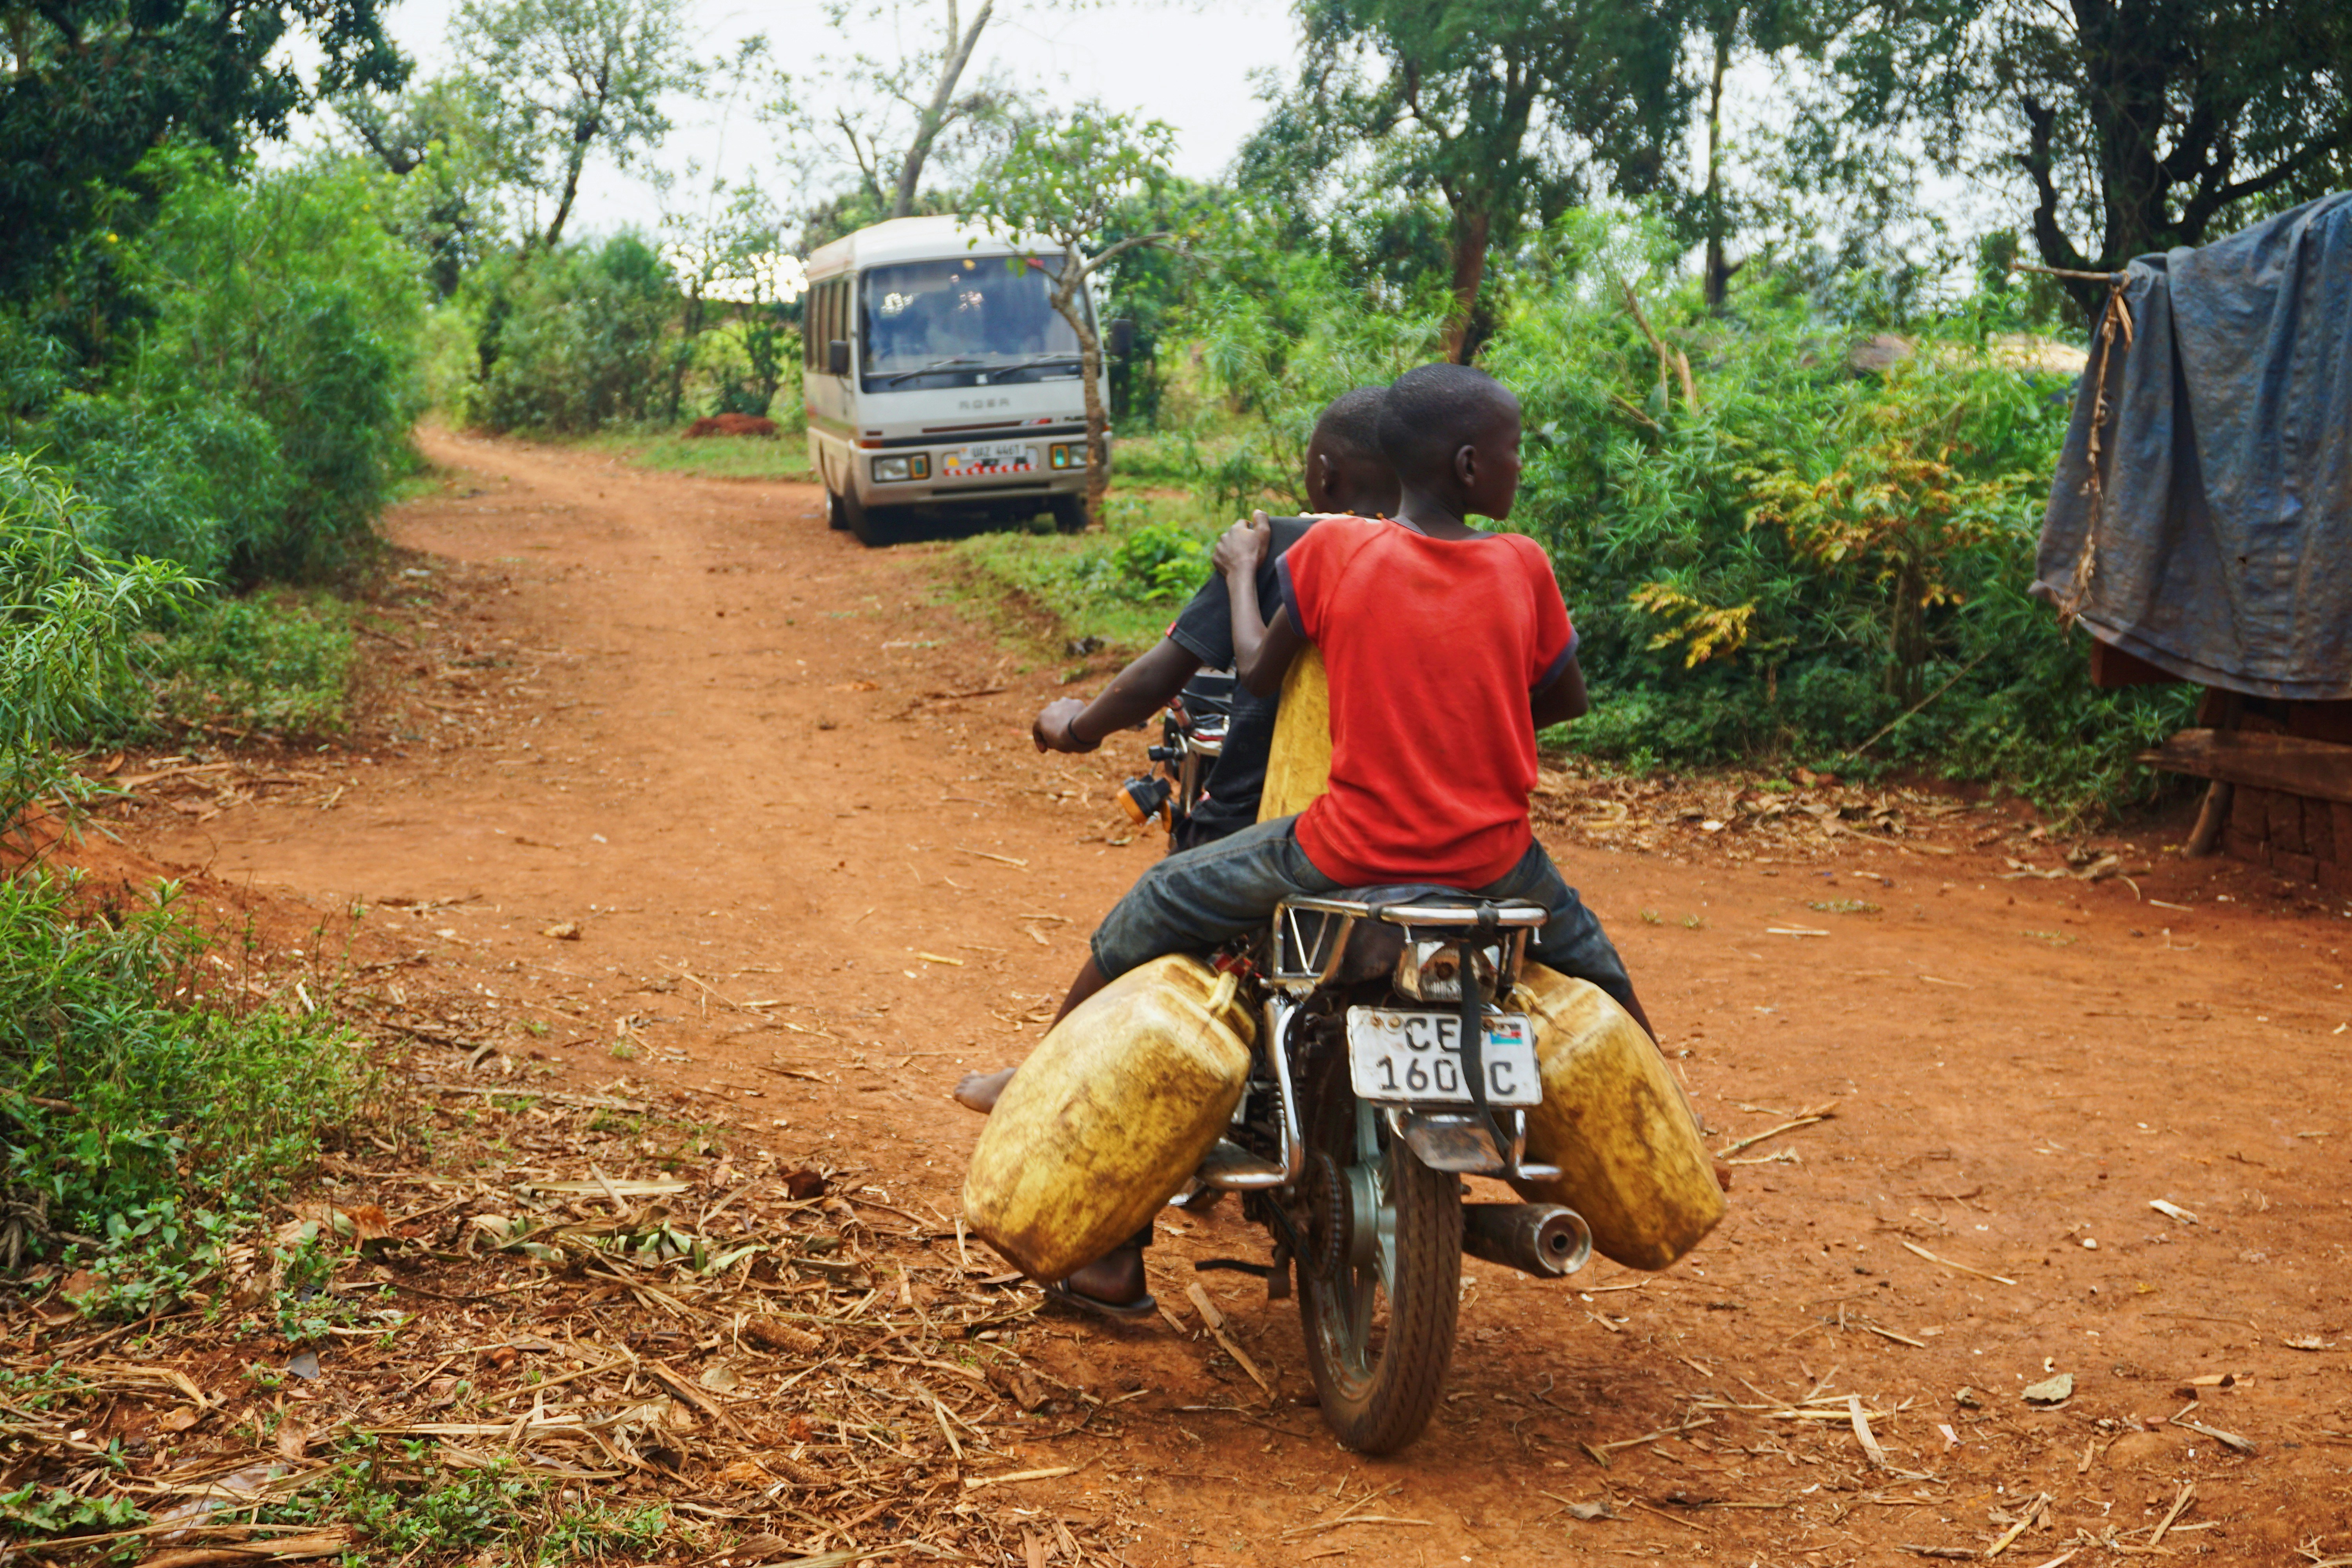 two young adults ride a motorbike down a dirt road carrying bags of supplies